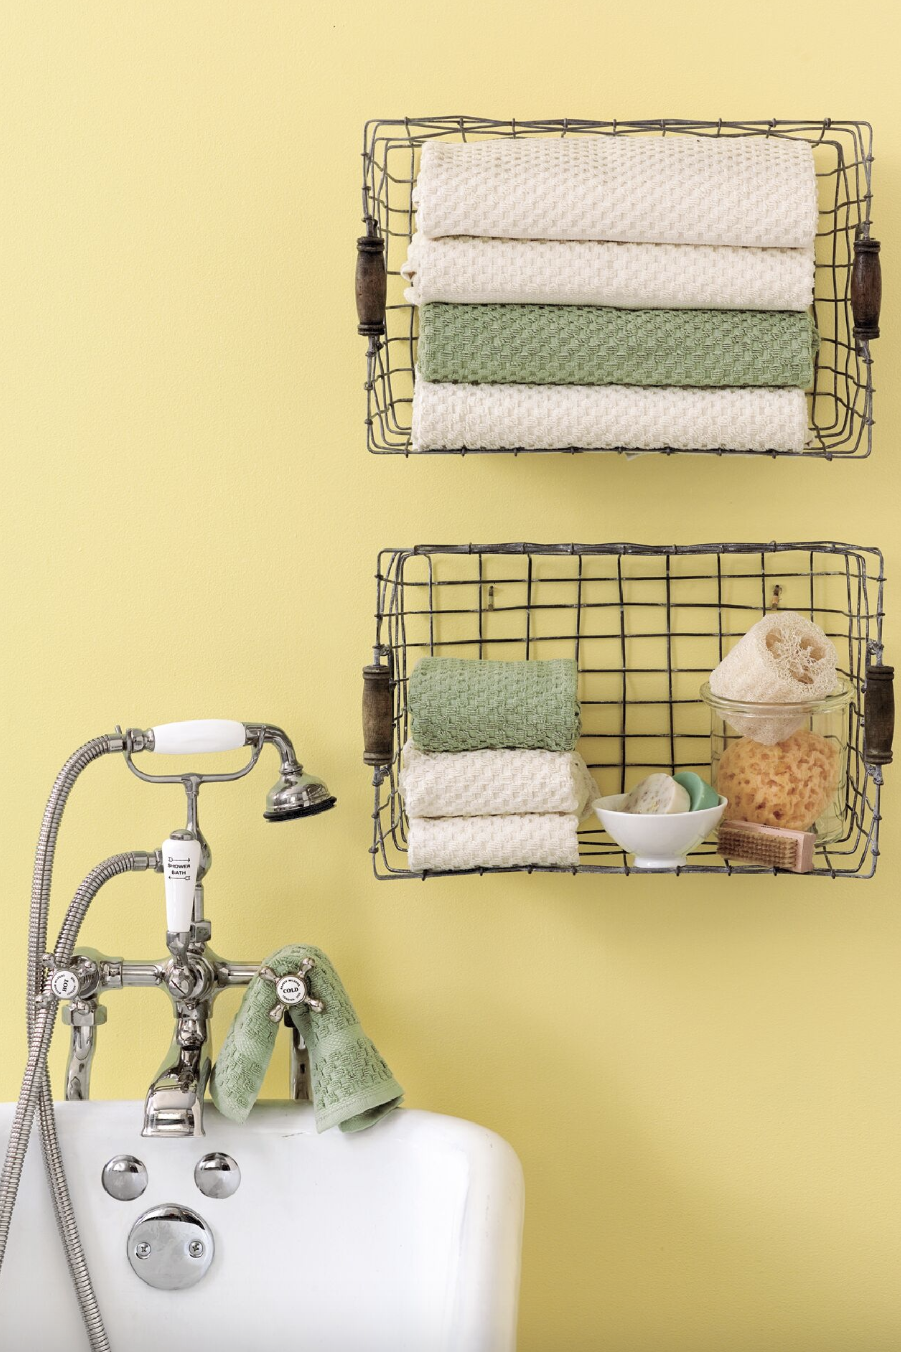 bathroom storage ideas, wire baskets attached to the yellow wall